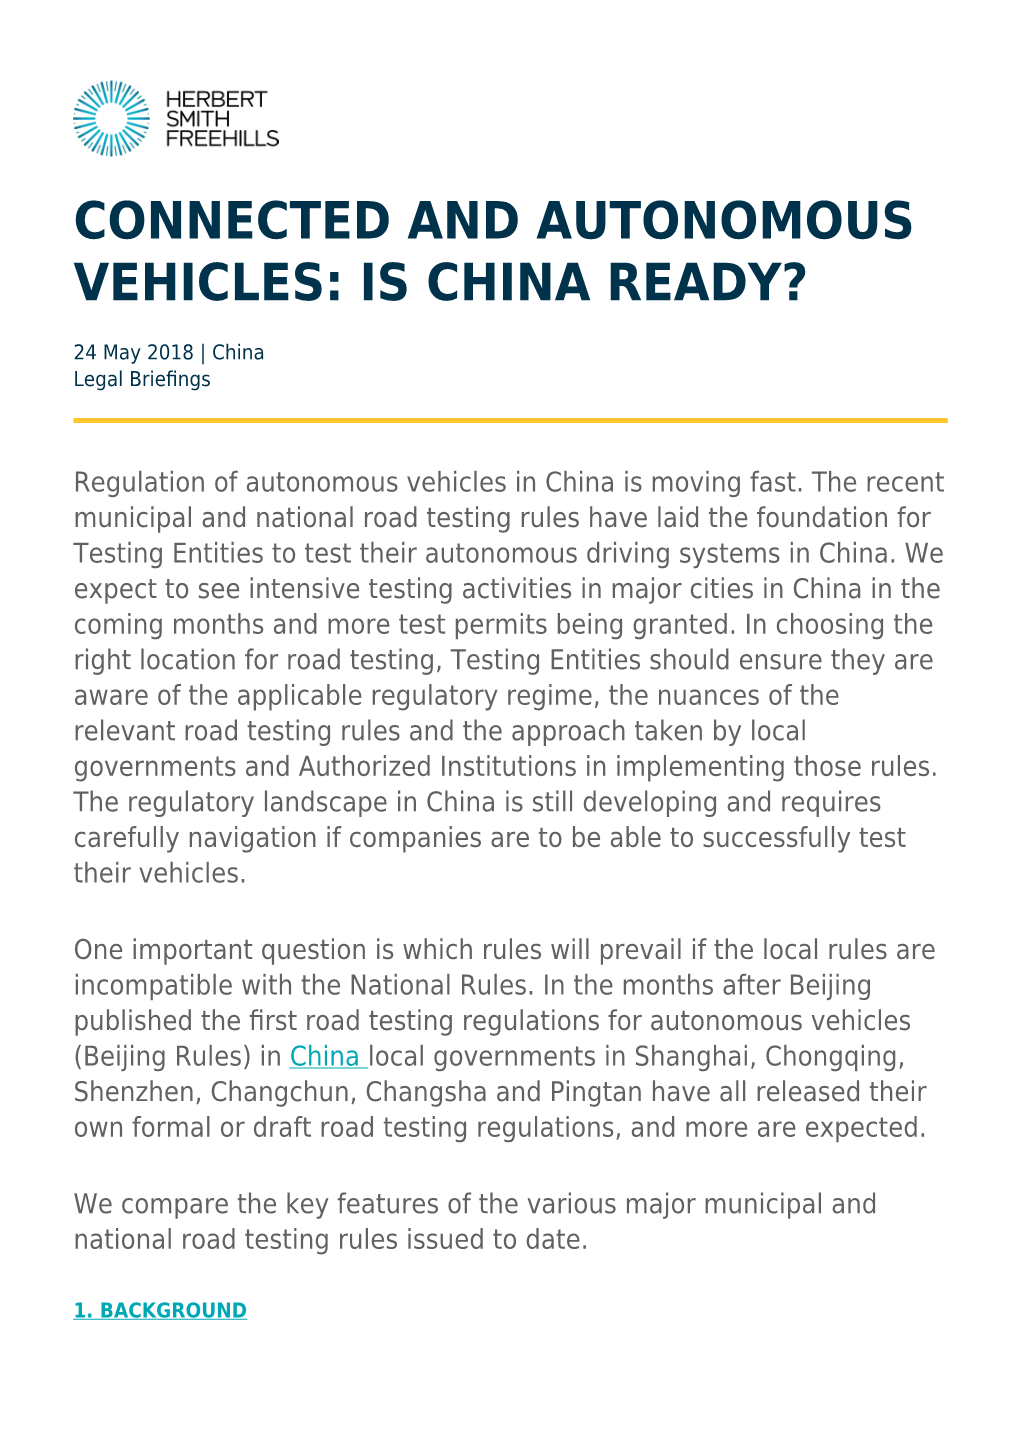 Connected and Autonomous Vehicles: Is China Ready?